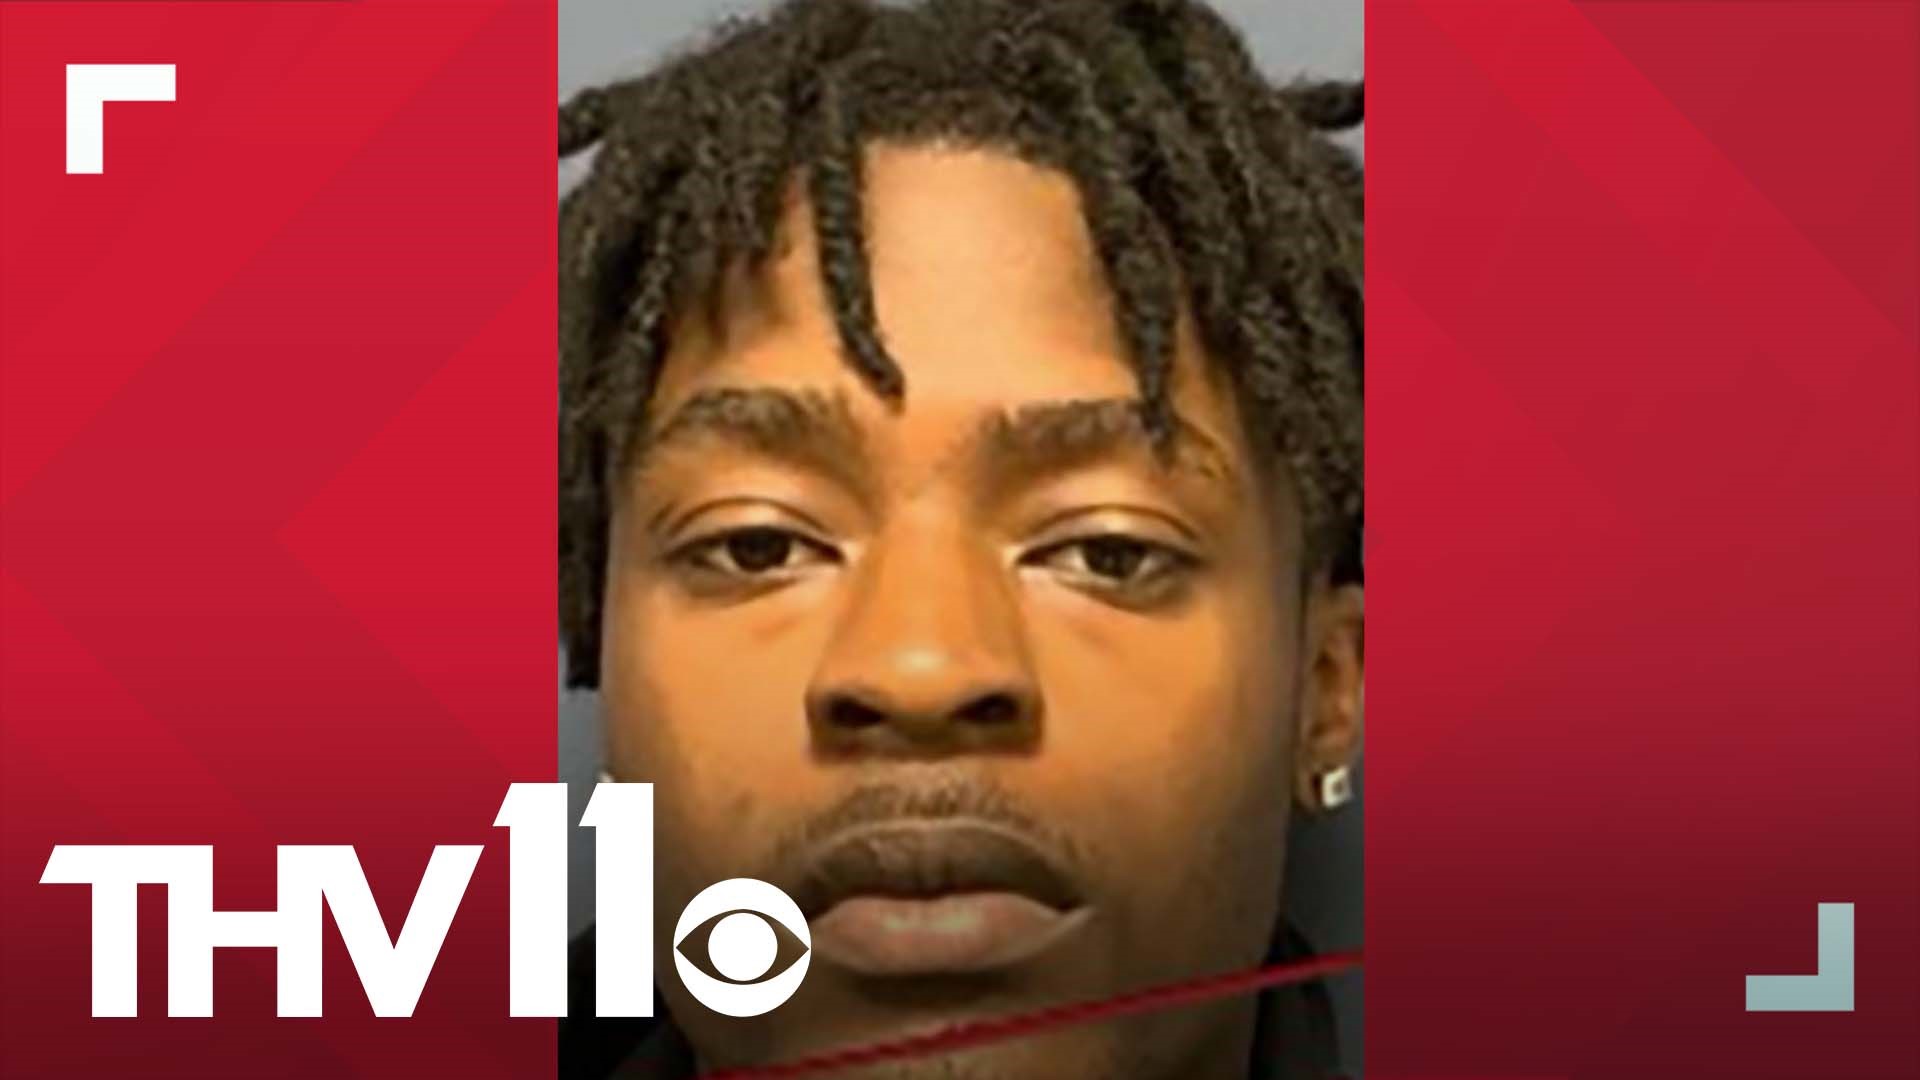 Little Rock police announced that they have arrested 18-year-old Kenjata Daniels in connection to the death of 7-year-old Chloe Alexander.